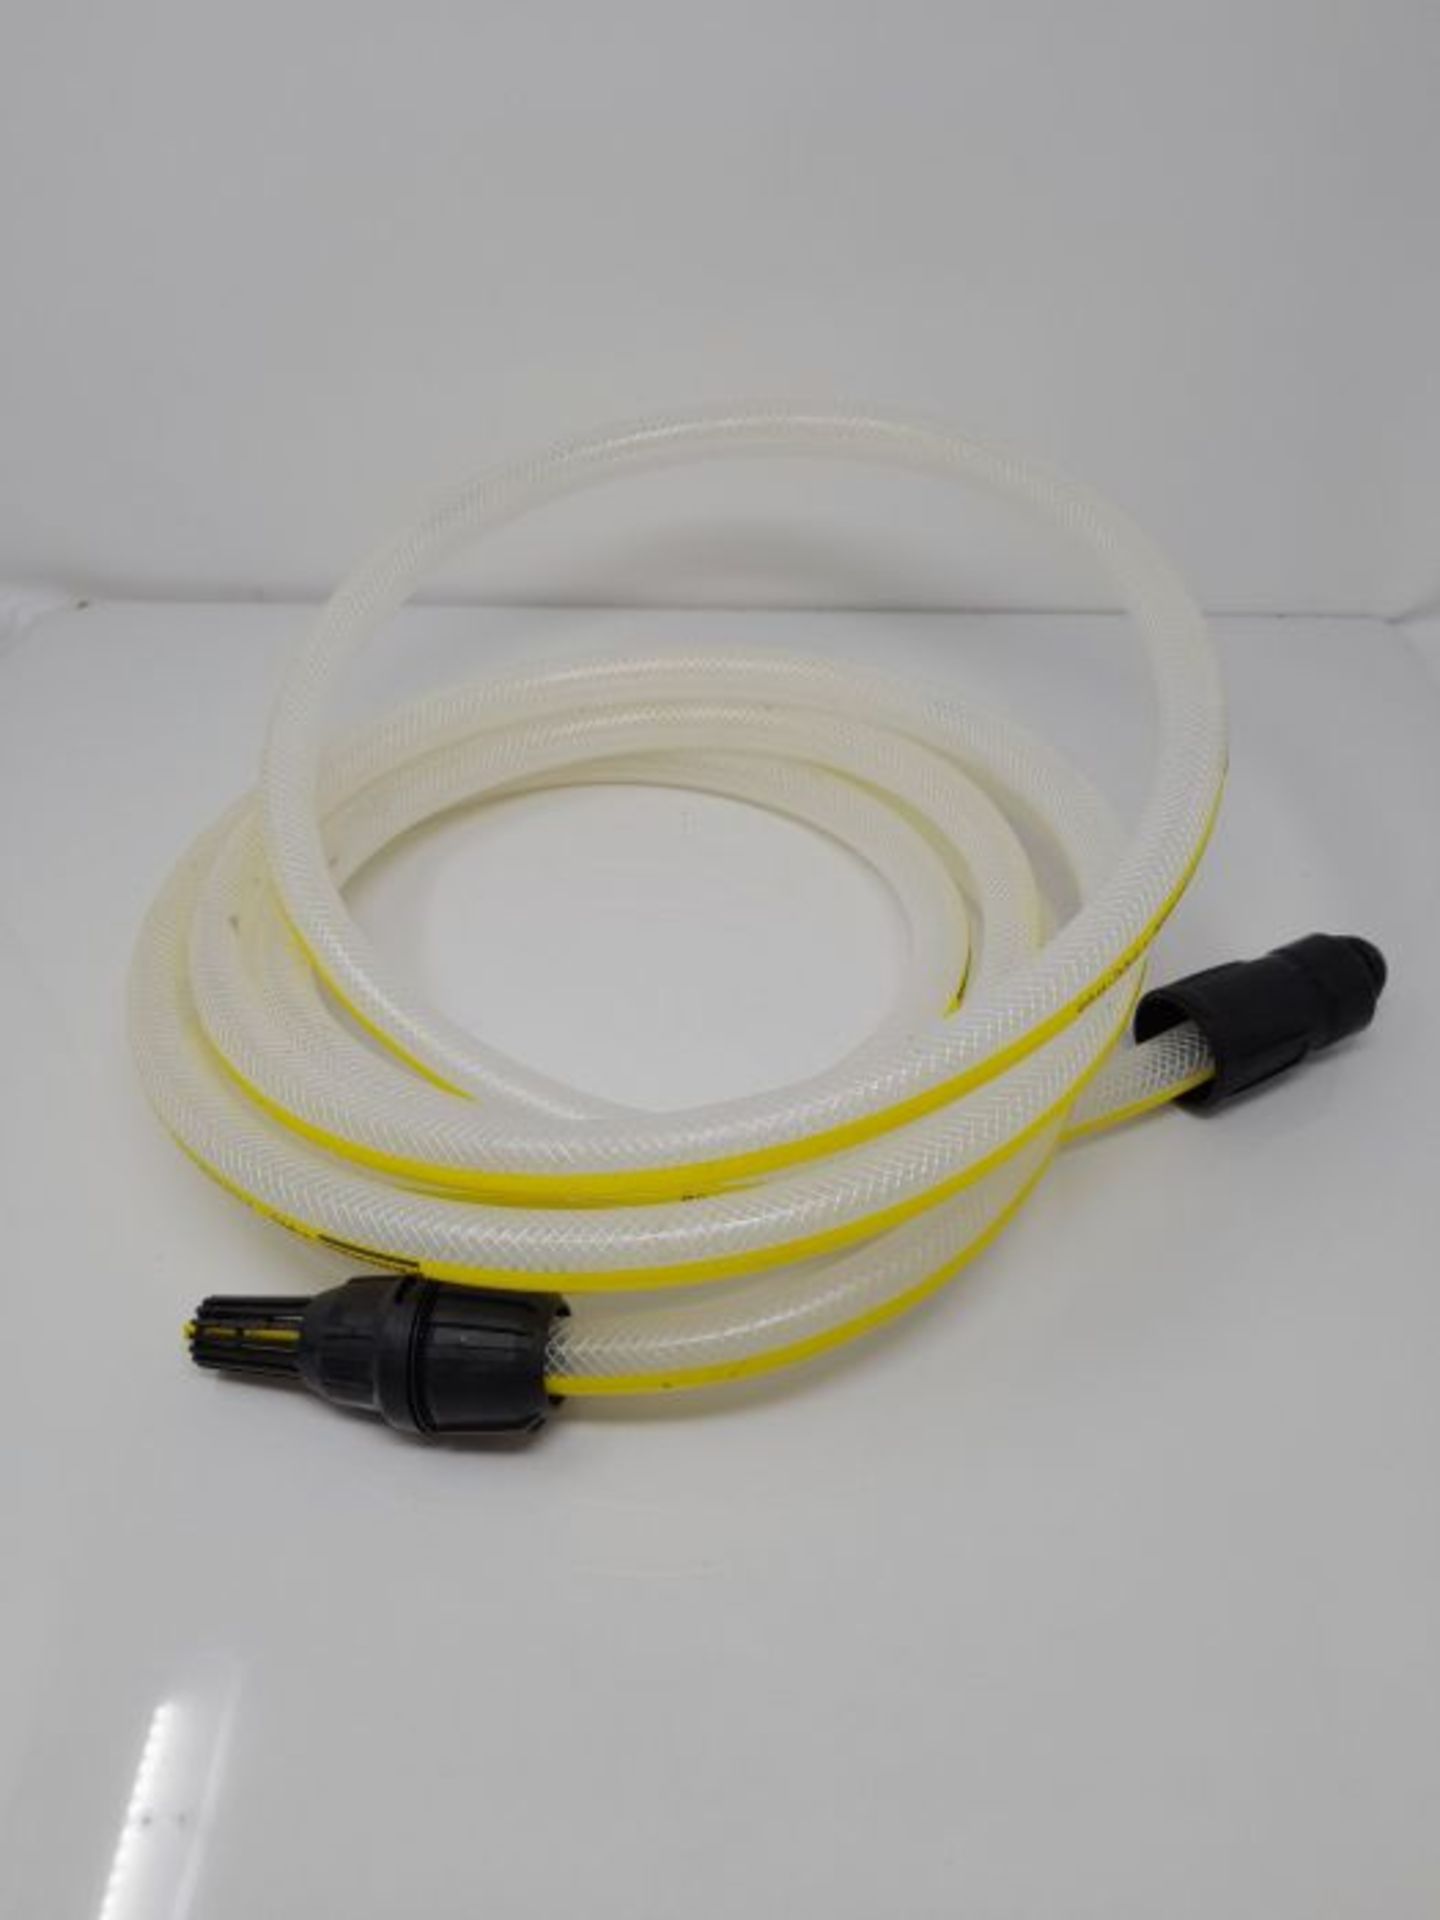 KÃ¤rcher 26431000 5 m Suction Hose and Filter for Pressure Washer Accessory, White, - Image 2 of 3